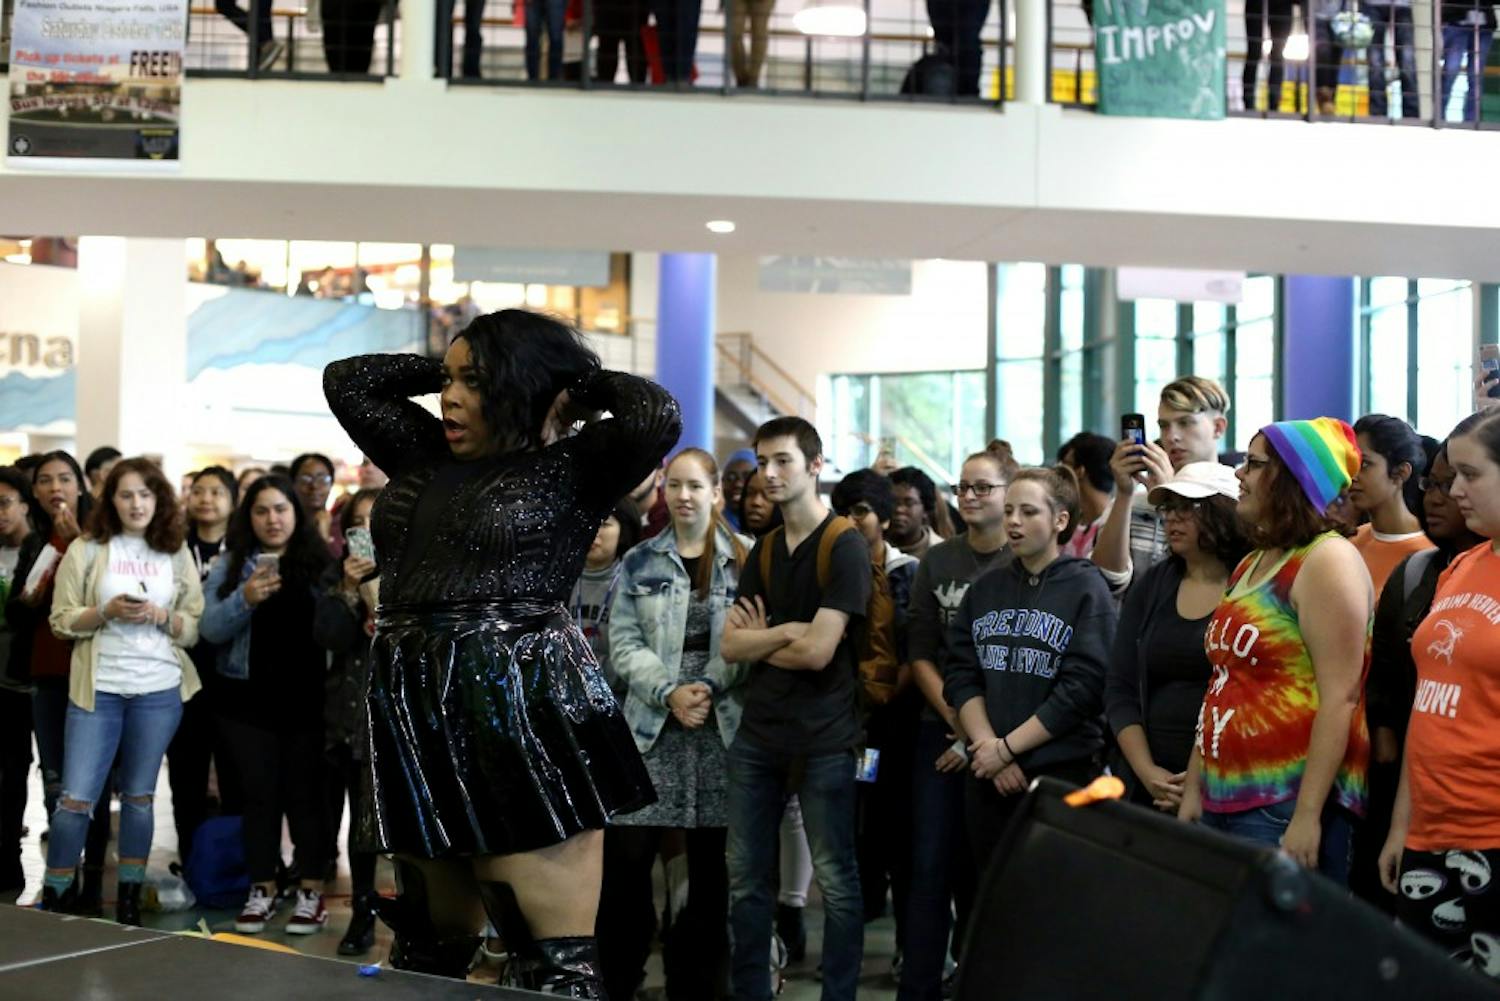 The LGBTA and IDC held their annual drag show on National Coming Out Day. Students passing through the SU curiously and eagerly watched the dancers' routines.